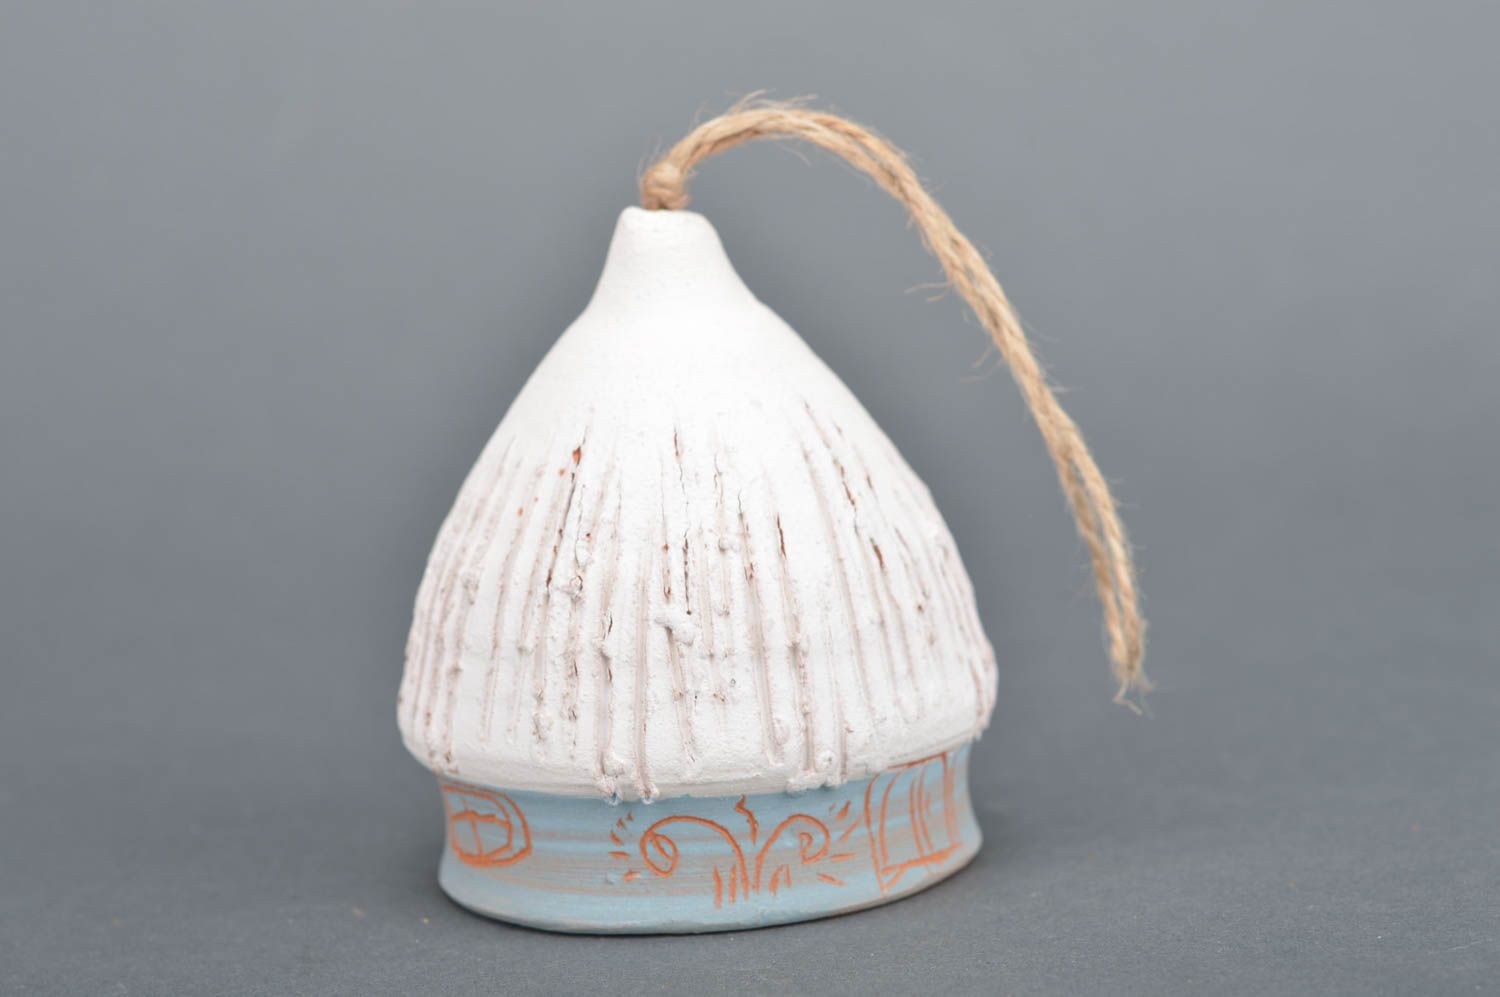 Handmade decorative small white painted ceramic bell with cord for hanging photo 1